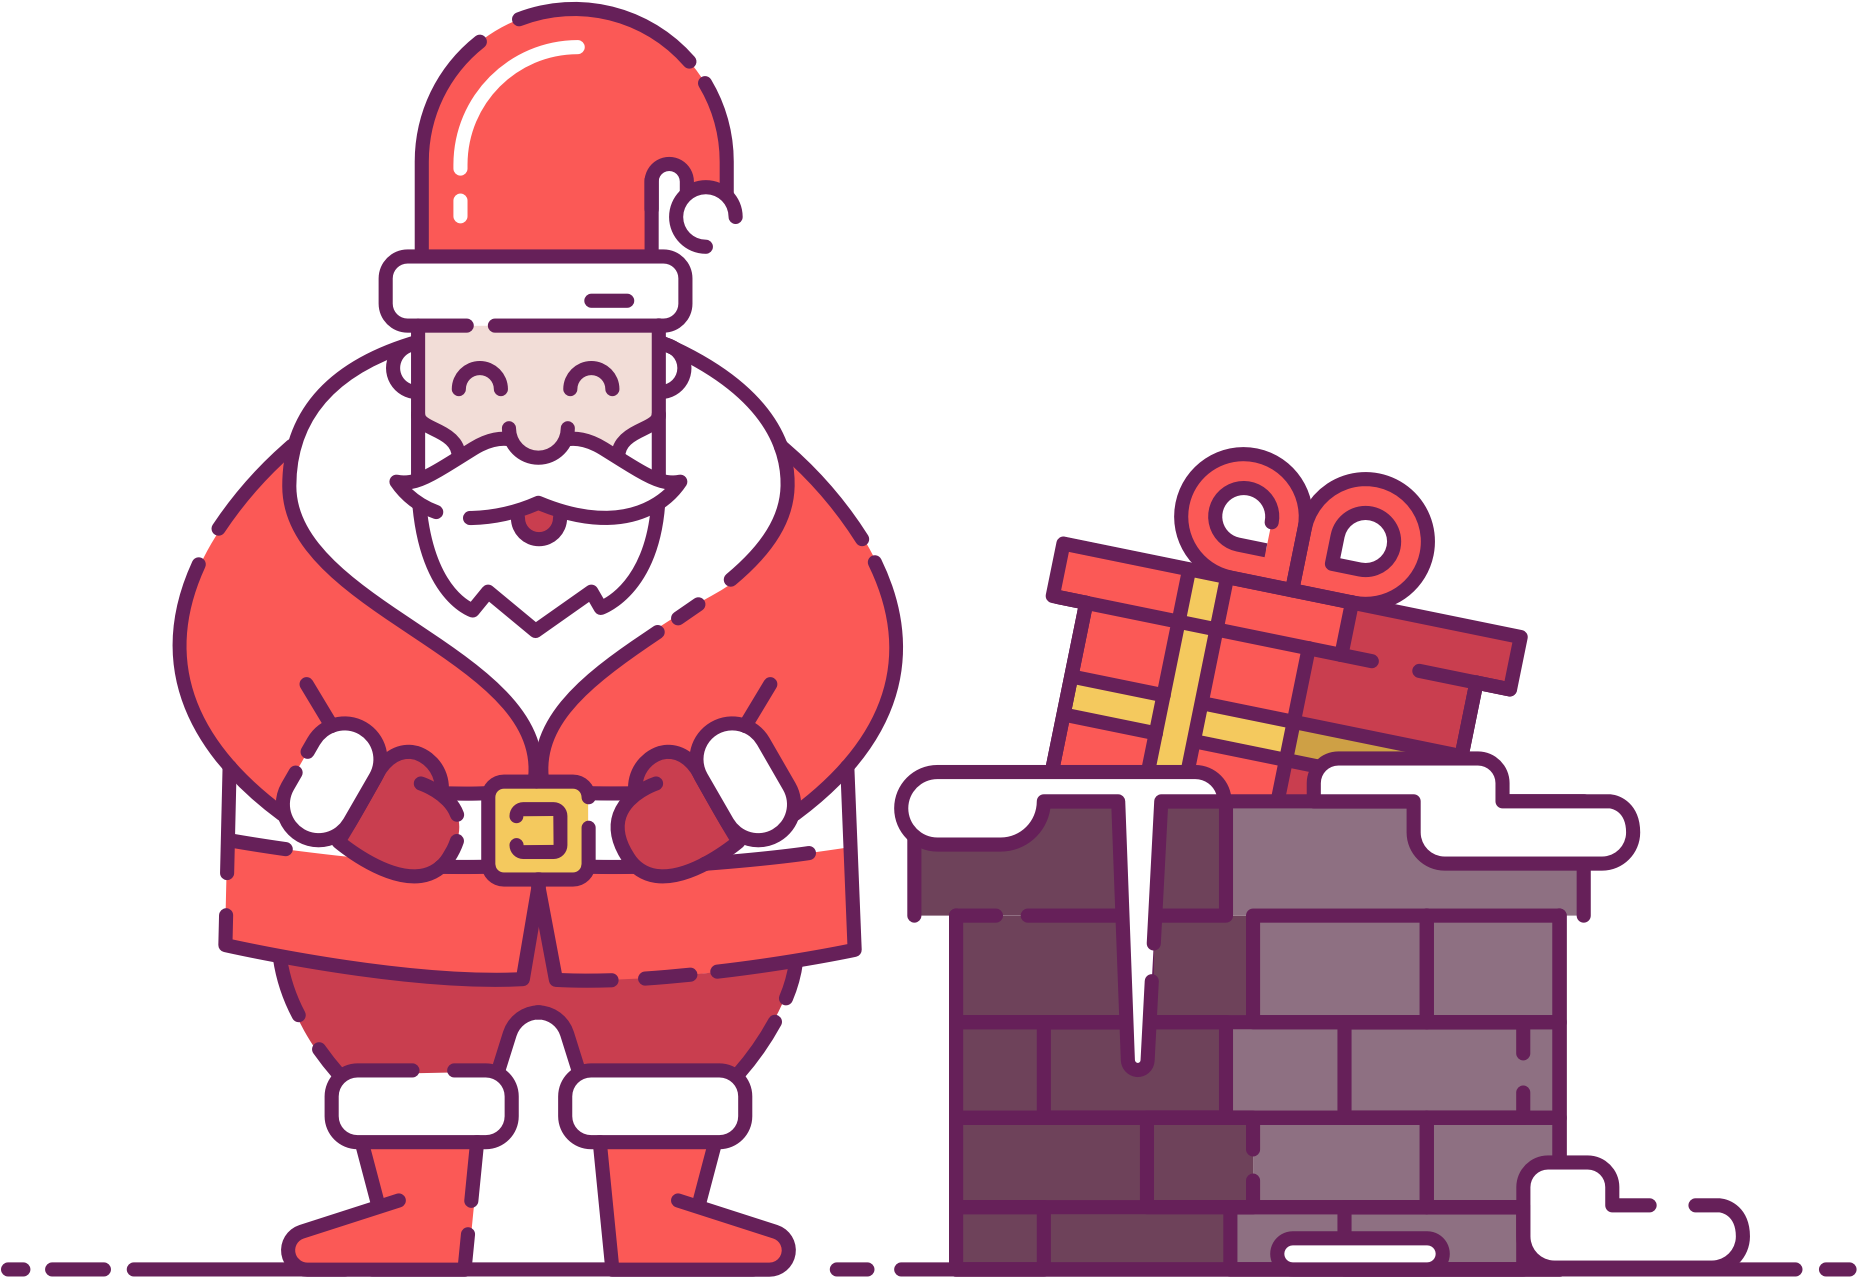 A Cartoon Of A Santa Claus Standing Next To A Chimney